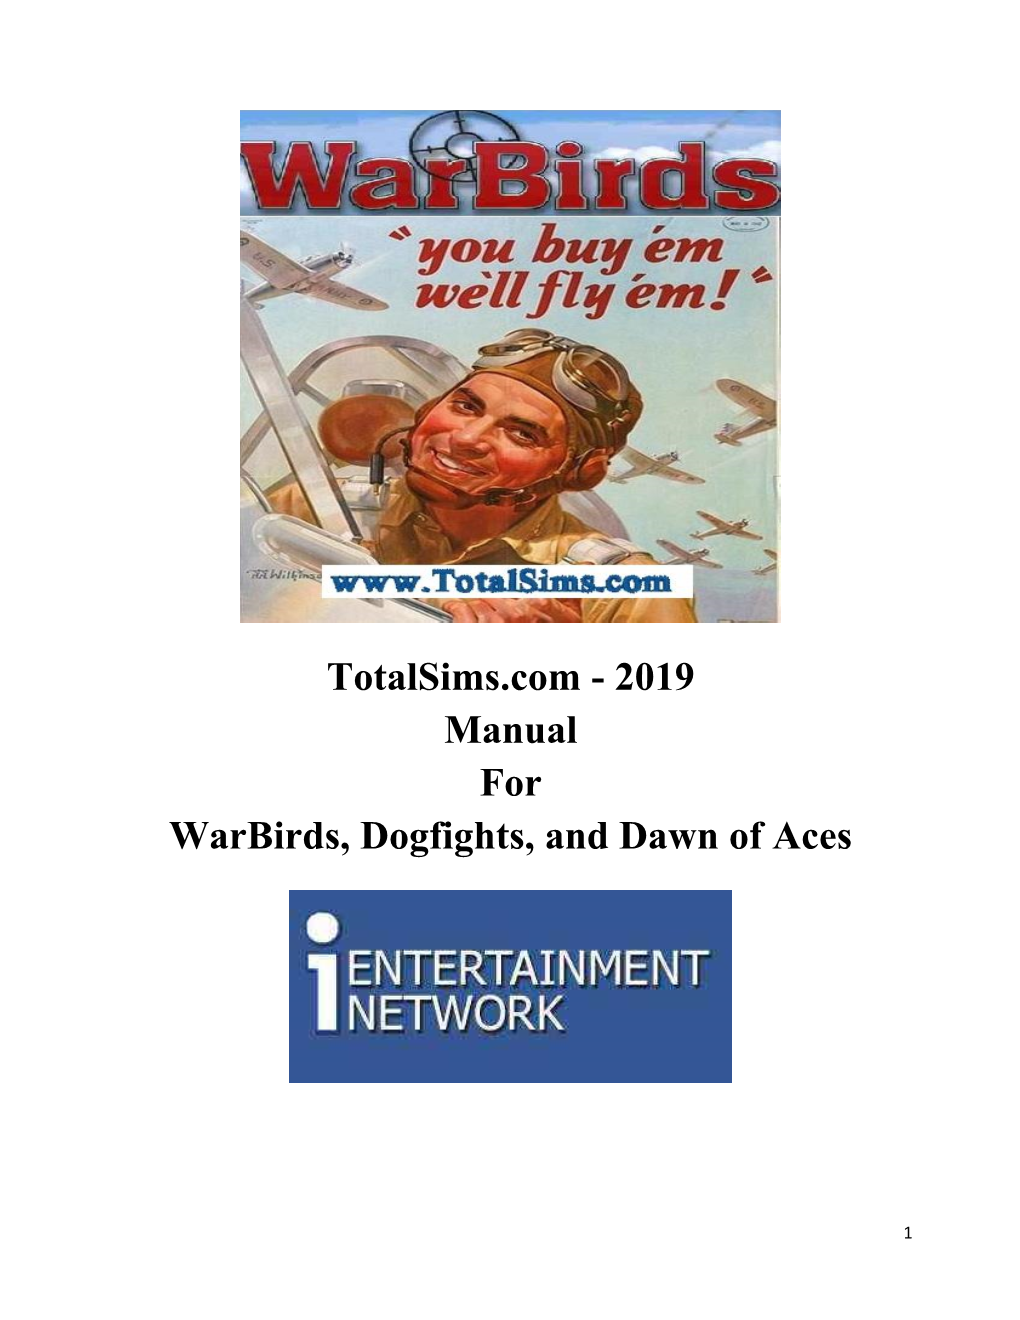 2019 Manual for Warbirds, Dogfights, and Dawn of Aces